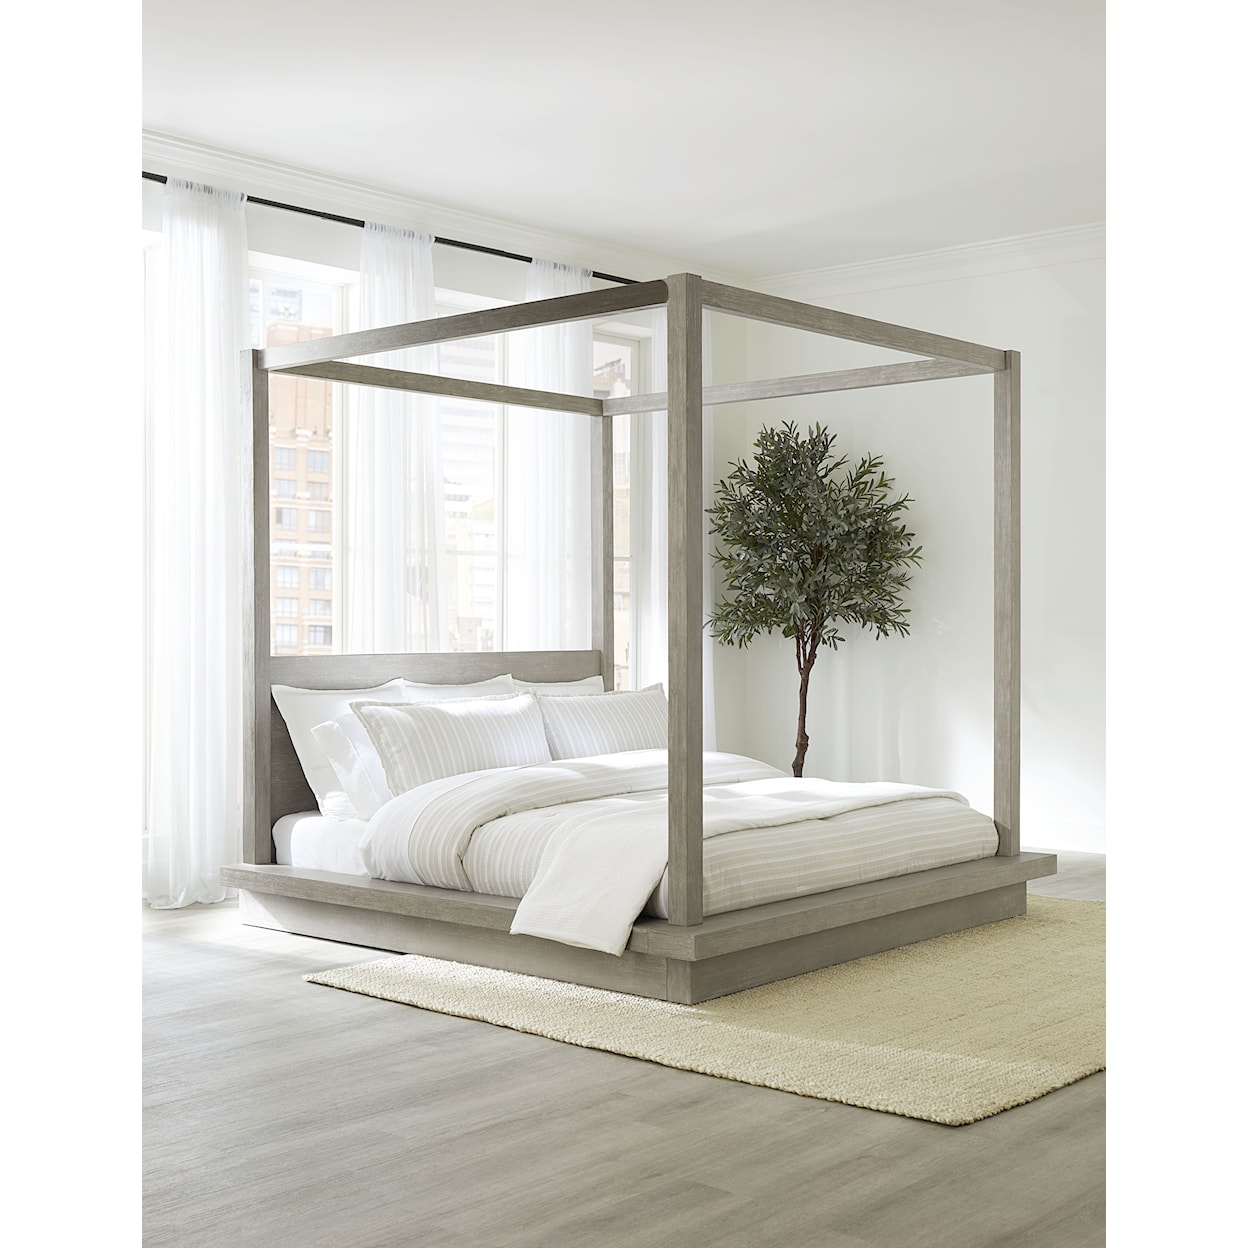 Modus International Melbourne Full Wood Canopy Bed